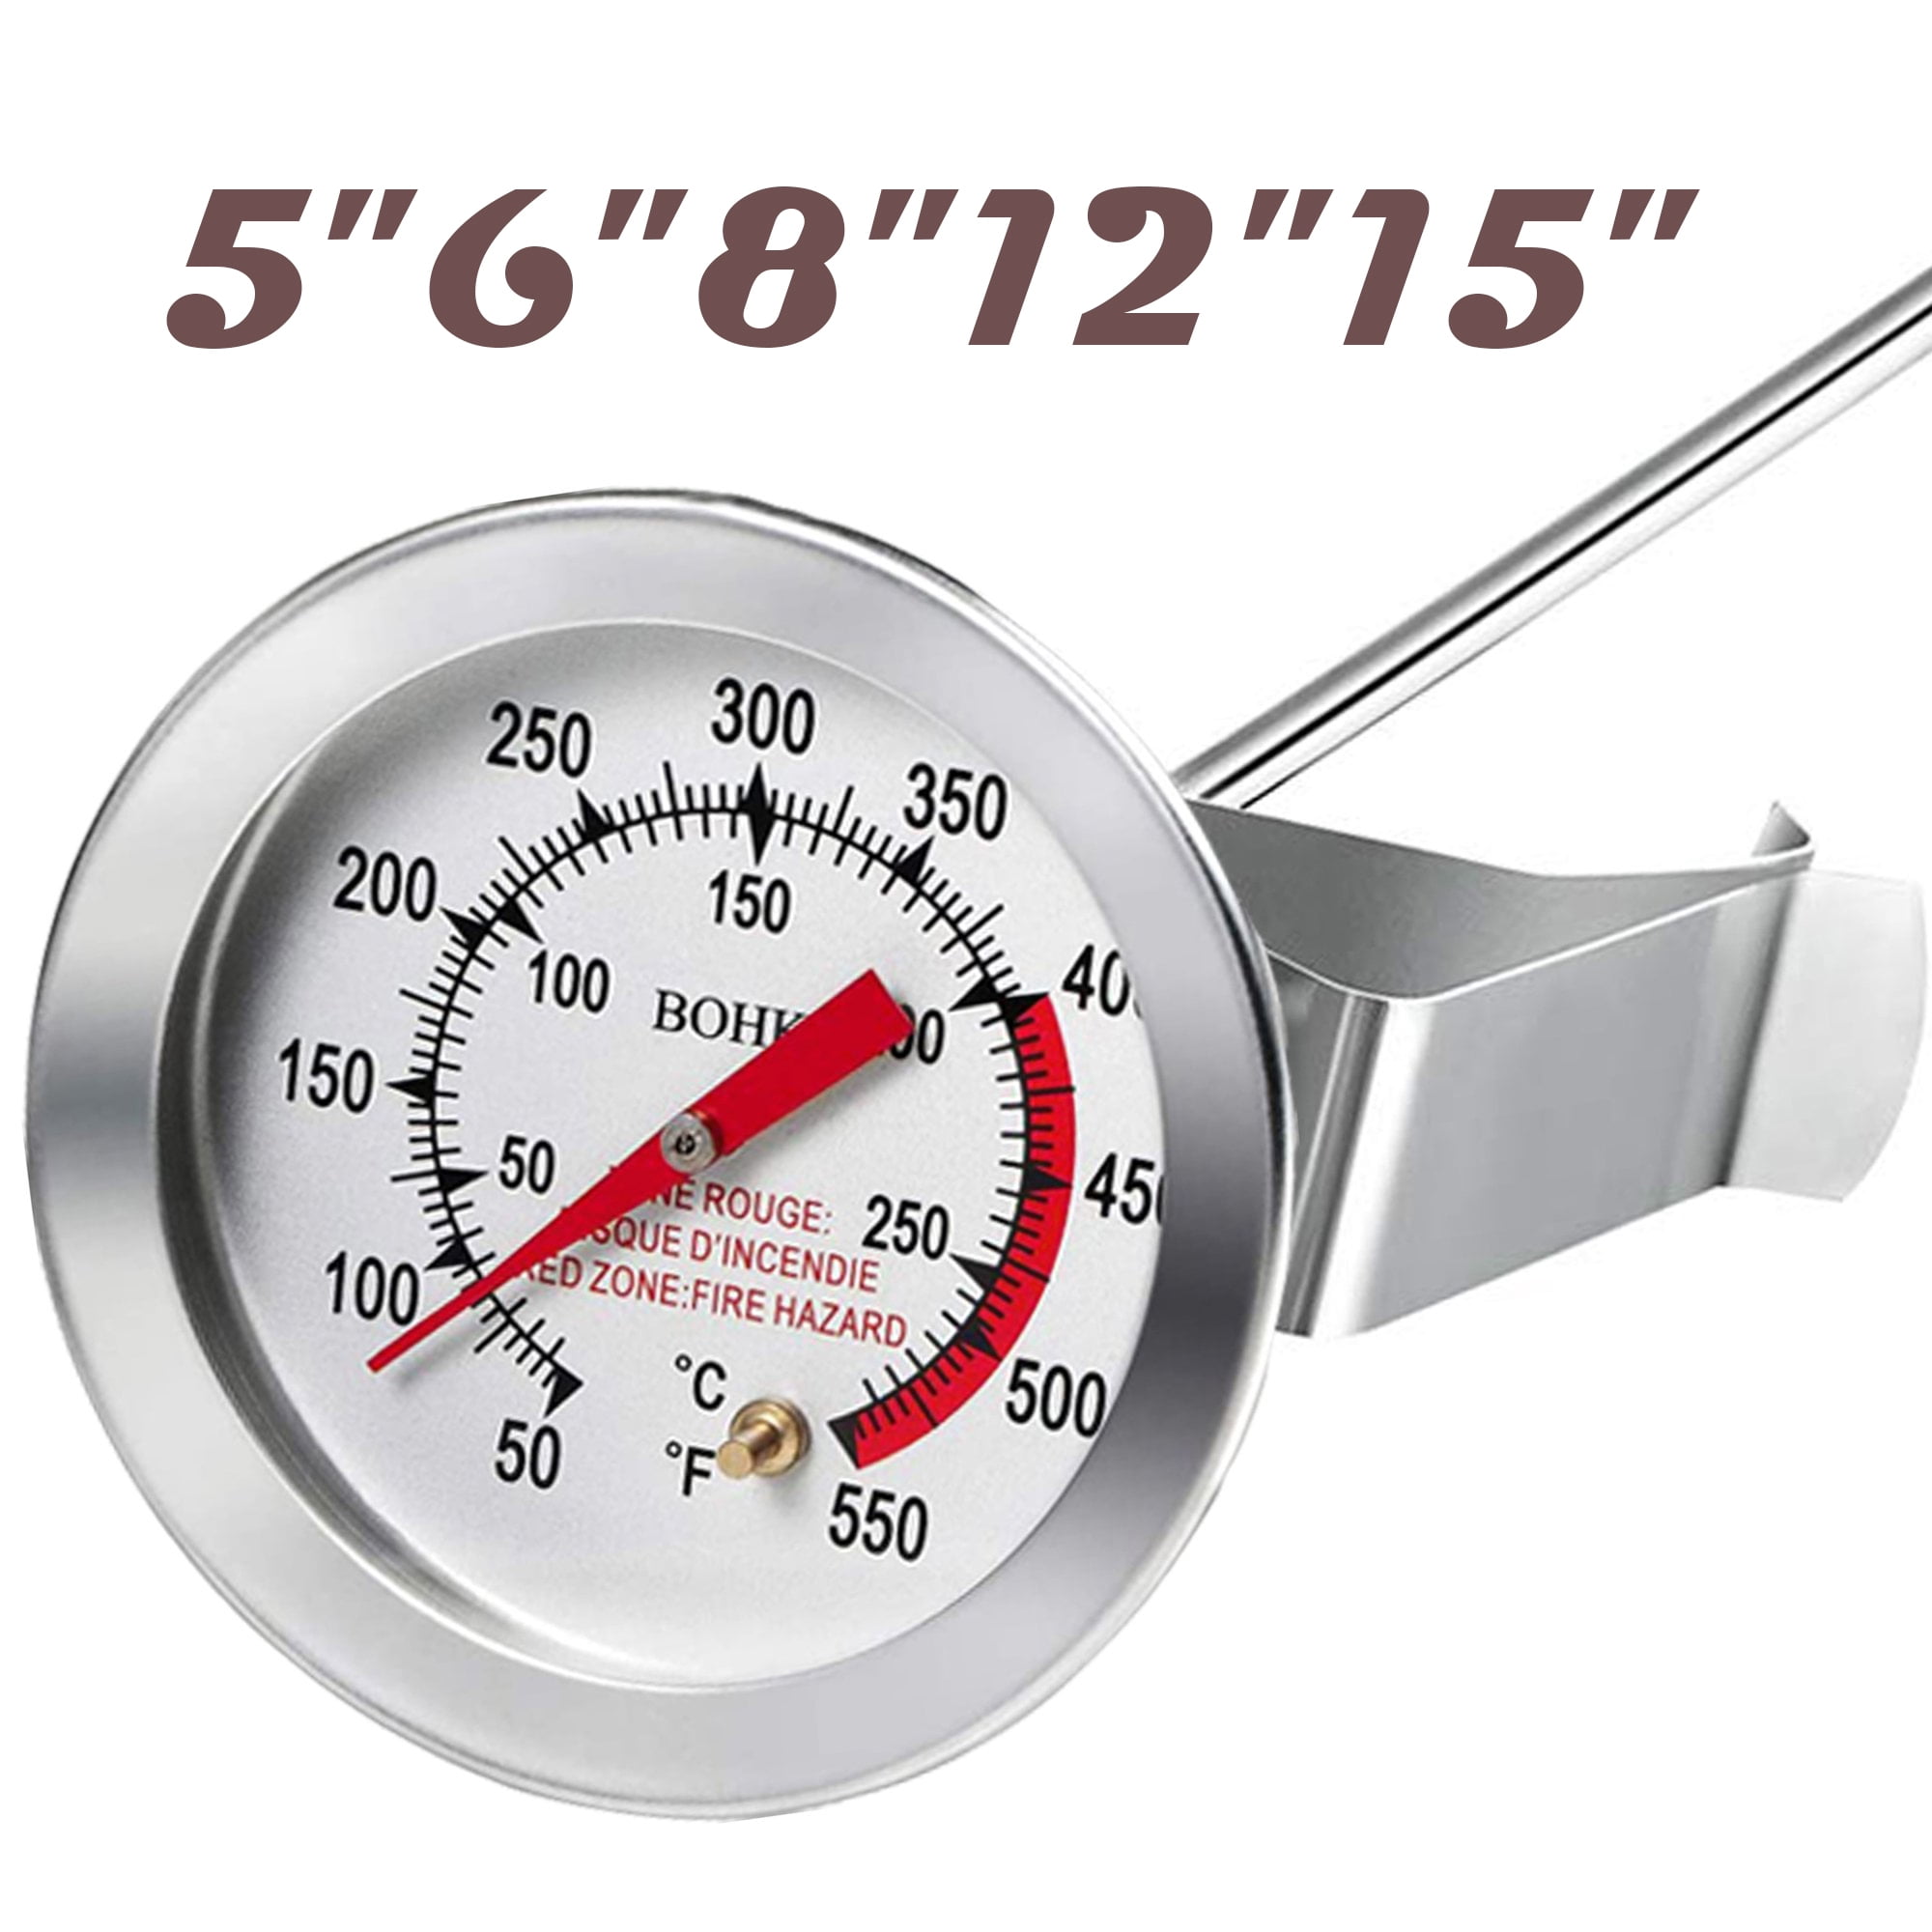 Stainless Steel Frying Oil Thermometer Fryer, Barbecue Thermometer Gauge  With Probe Length 20cm, 1 Pcs For Fries, Fried Chicken 